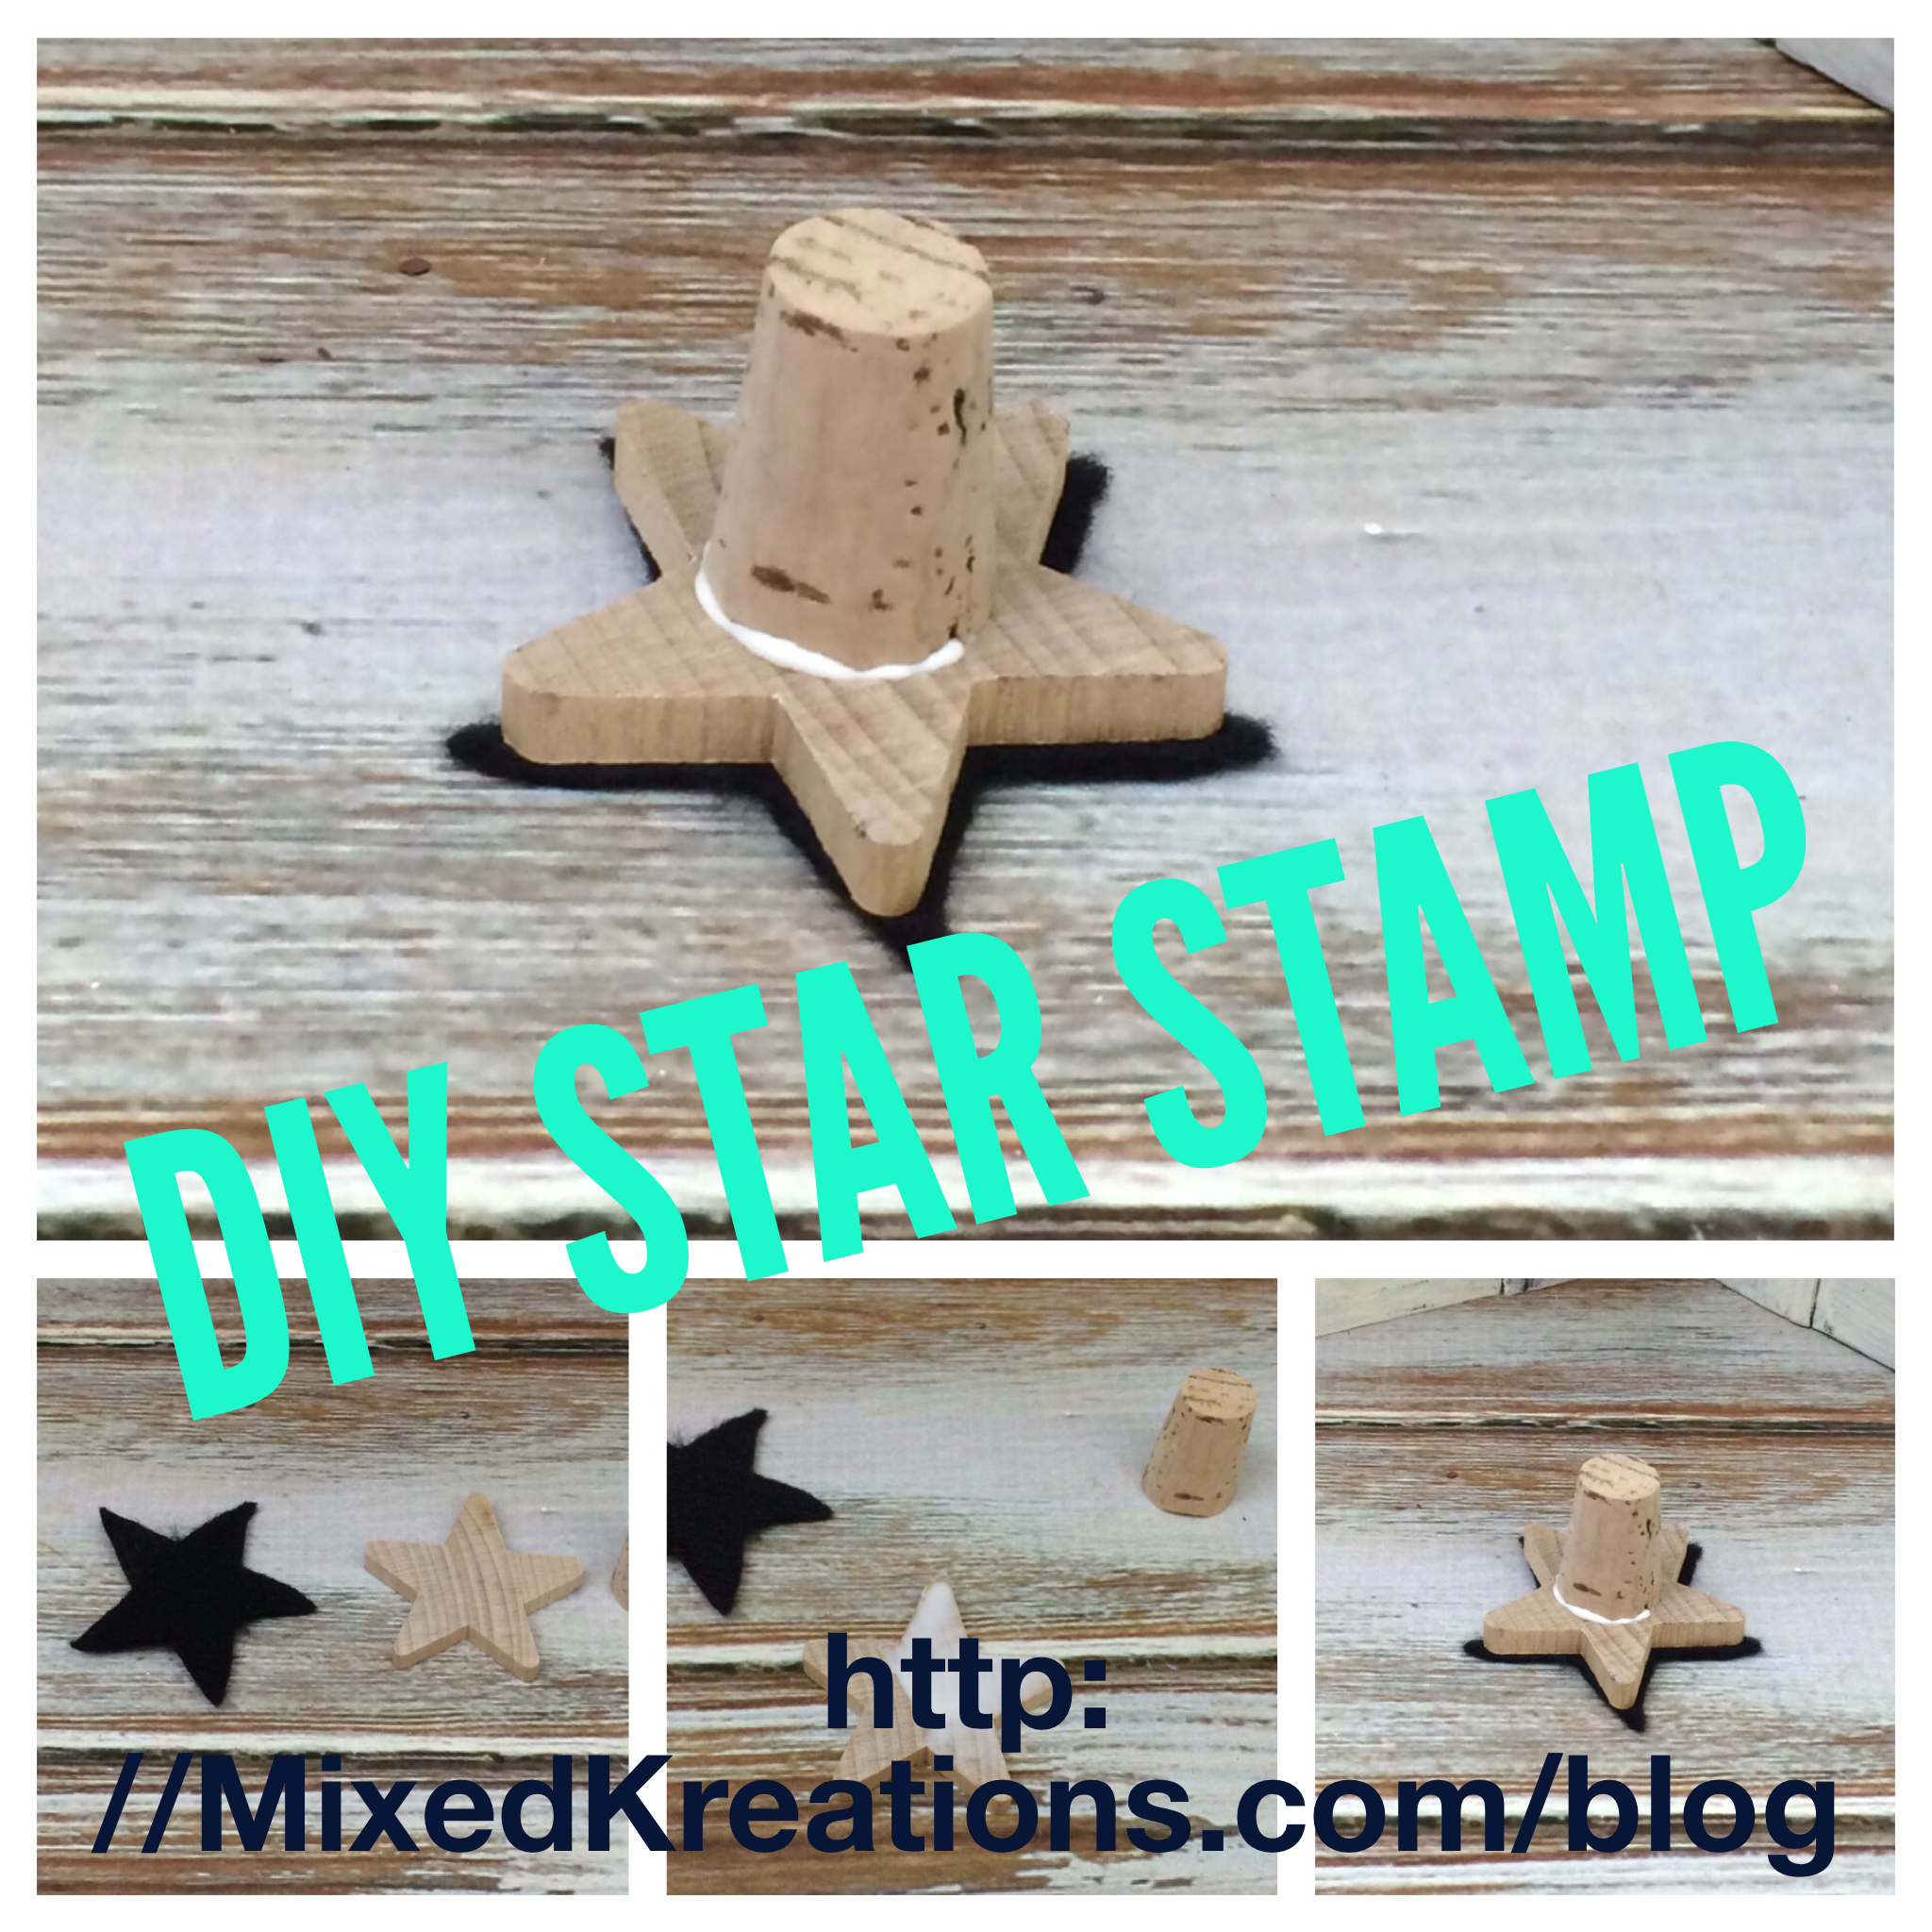 Diy Star Stamp - Mixed Kreations